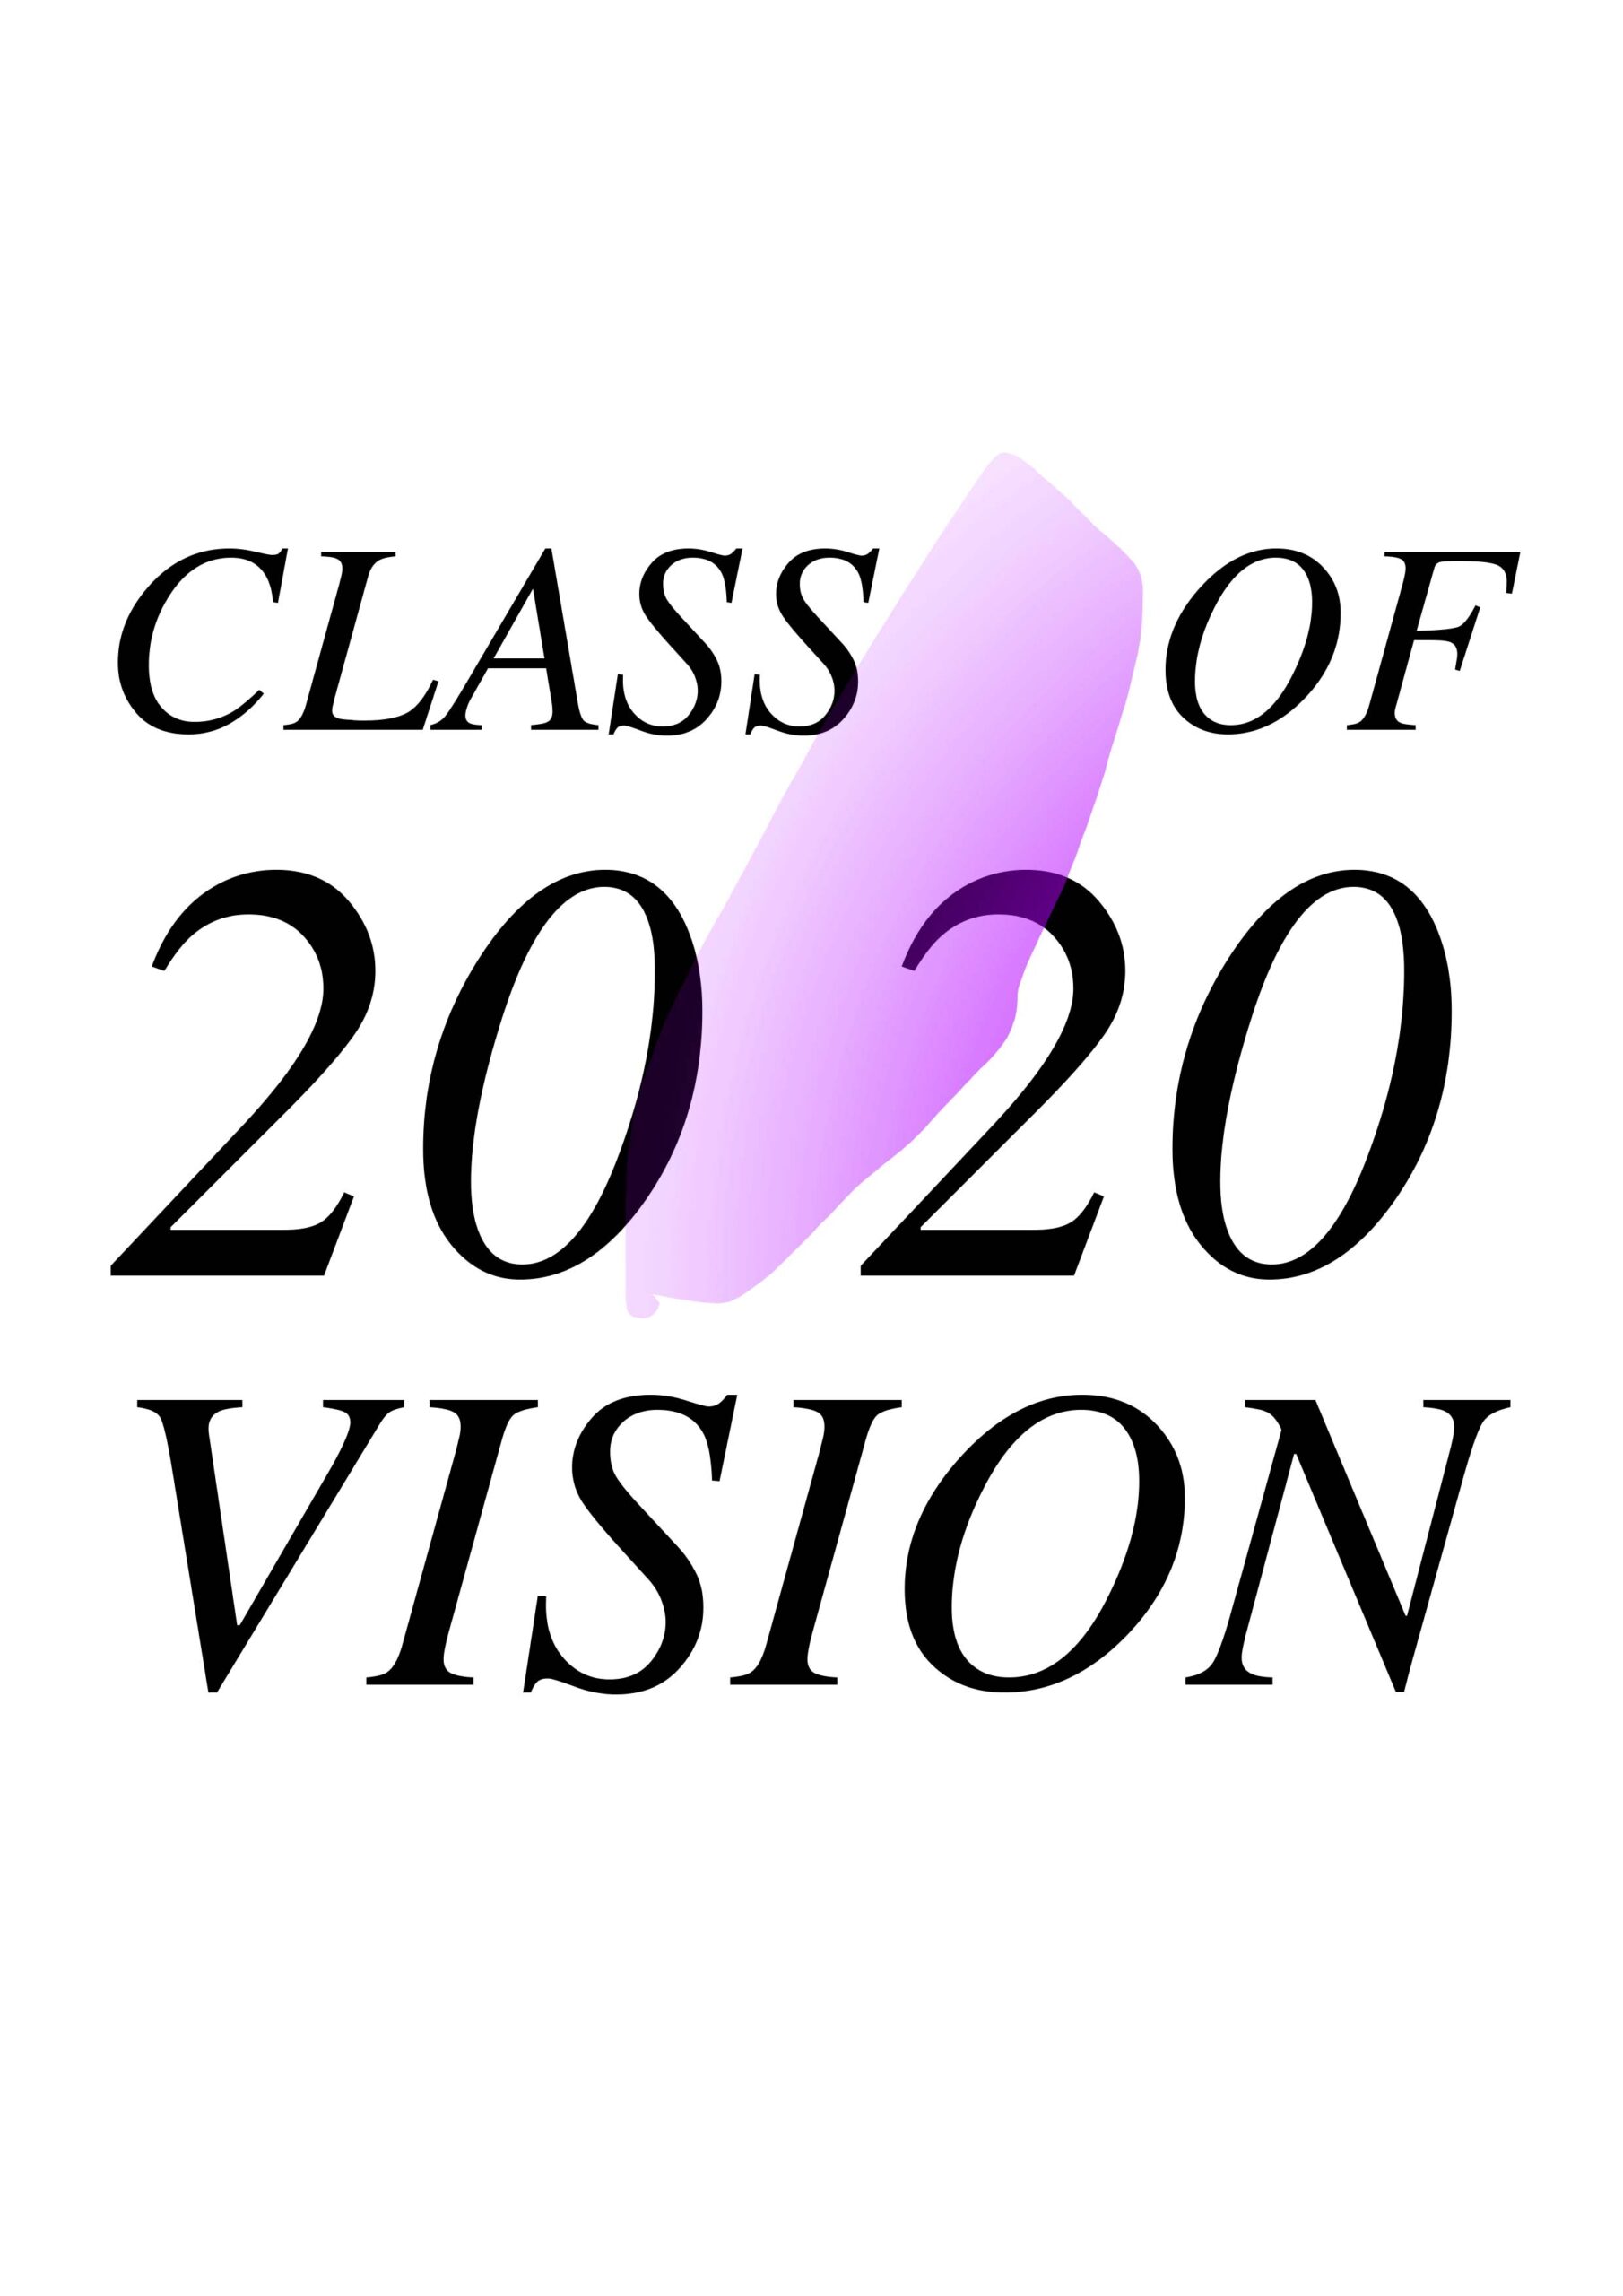 How to apply to Class of 2020VIsion